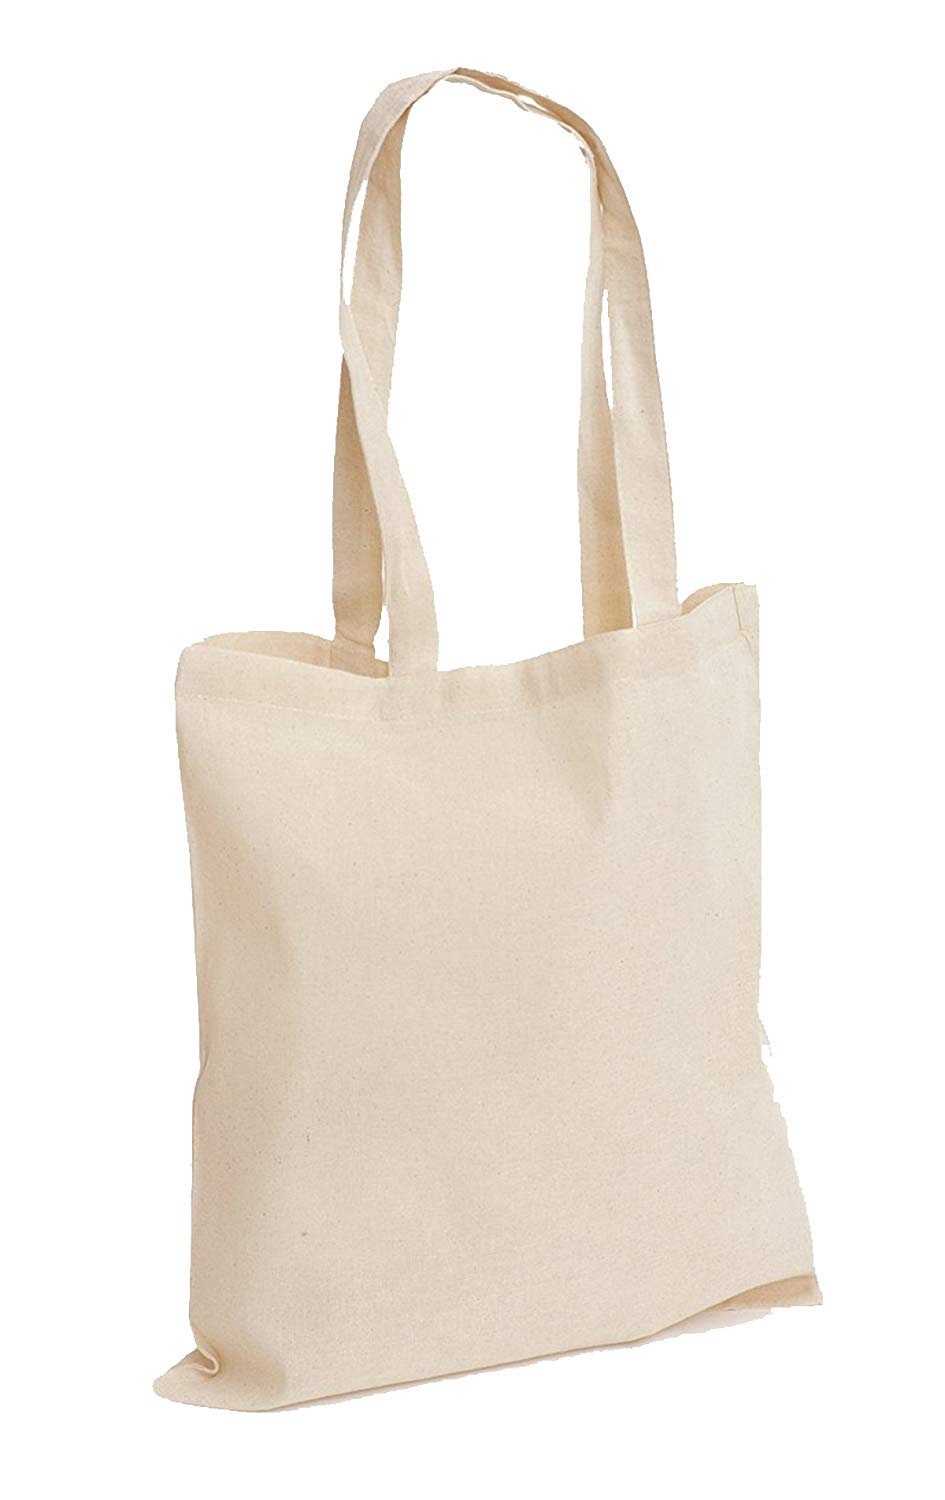 Pack of 10 Premium Plain Natural Cotton Shopping Tote Bags Eco Friendly  Shoppers Ideal for Printing and Decorating 